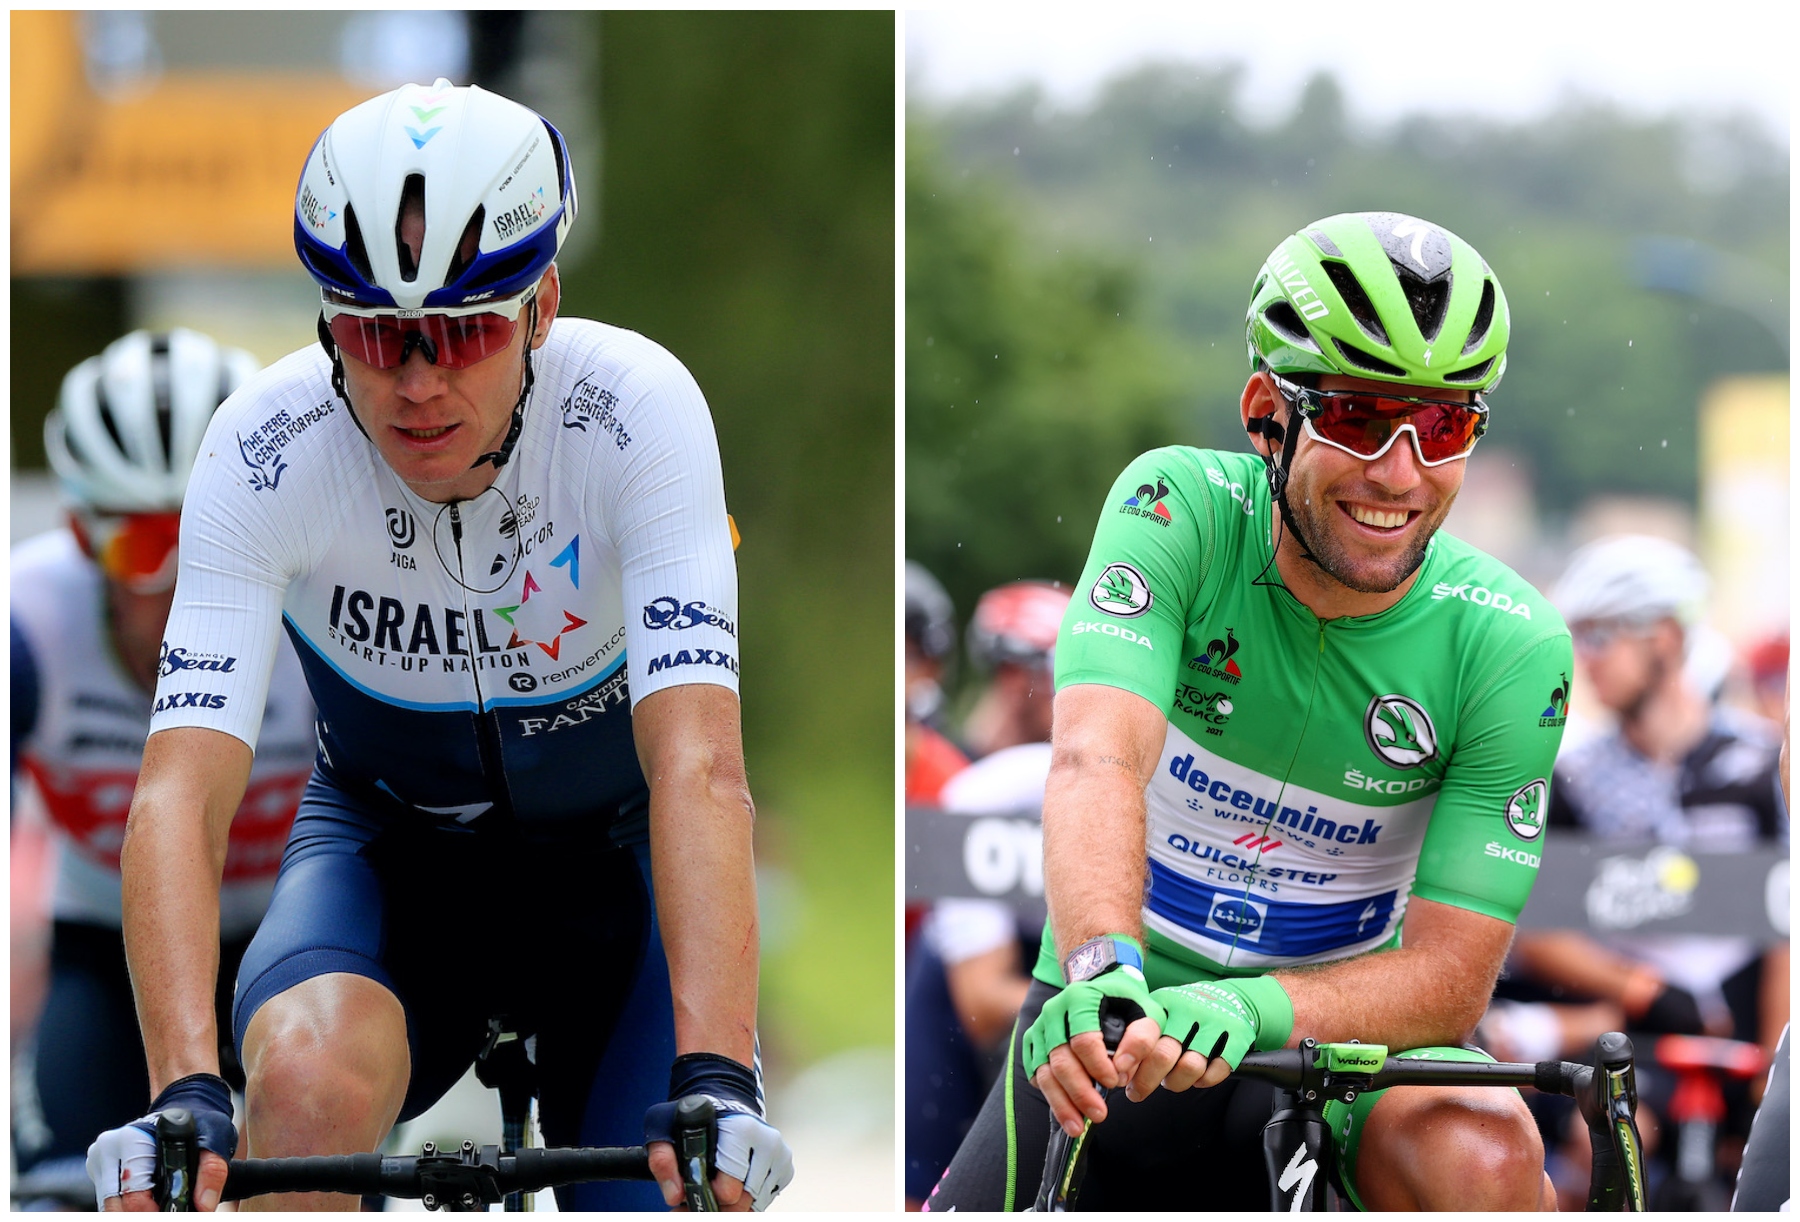 Mark Cavendish and Chris Froome are separated by 20 seconds at the Tour de France